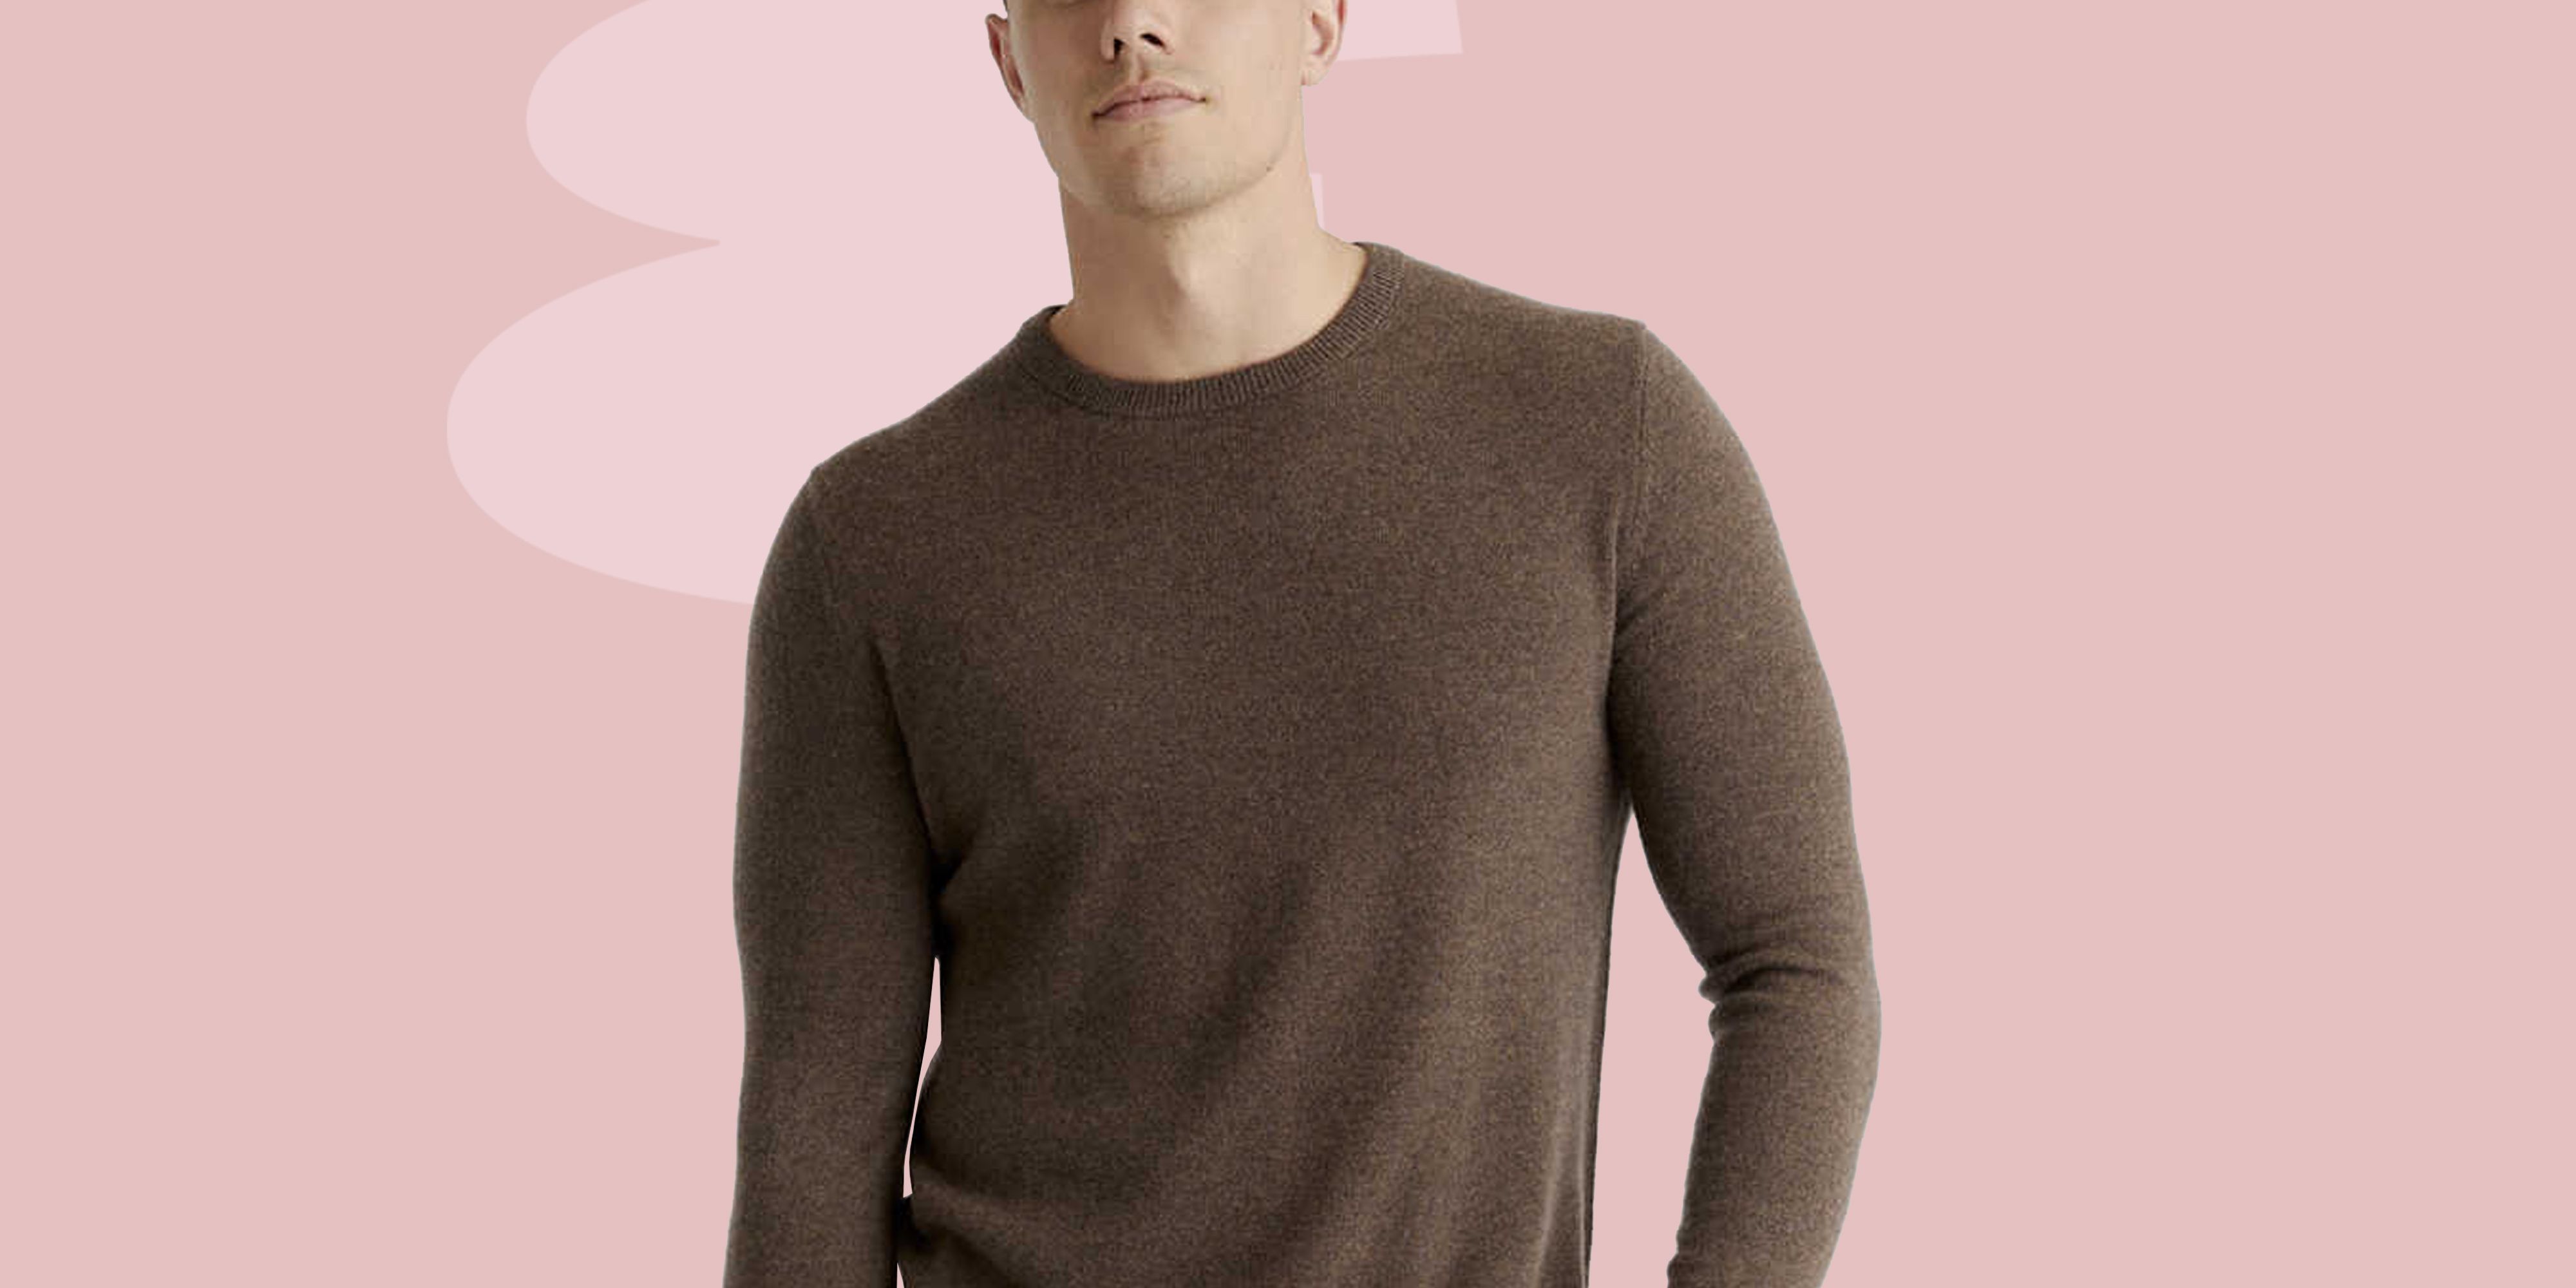 Dark Grey Soft Knit Crew Neck Relaxed Fit Jumper